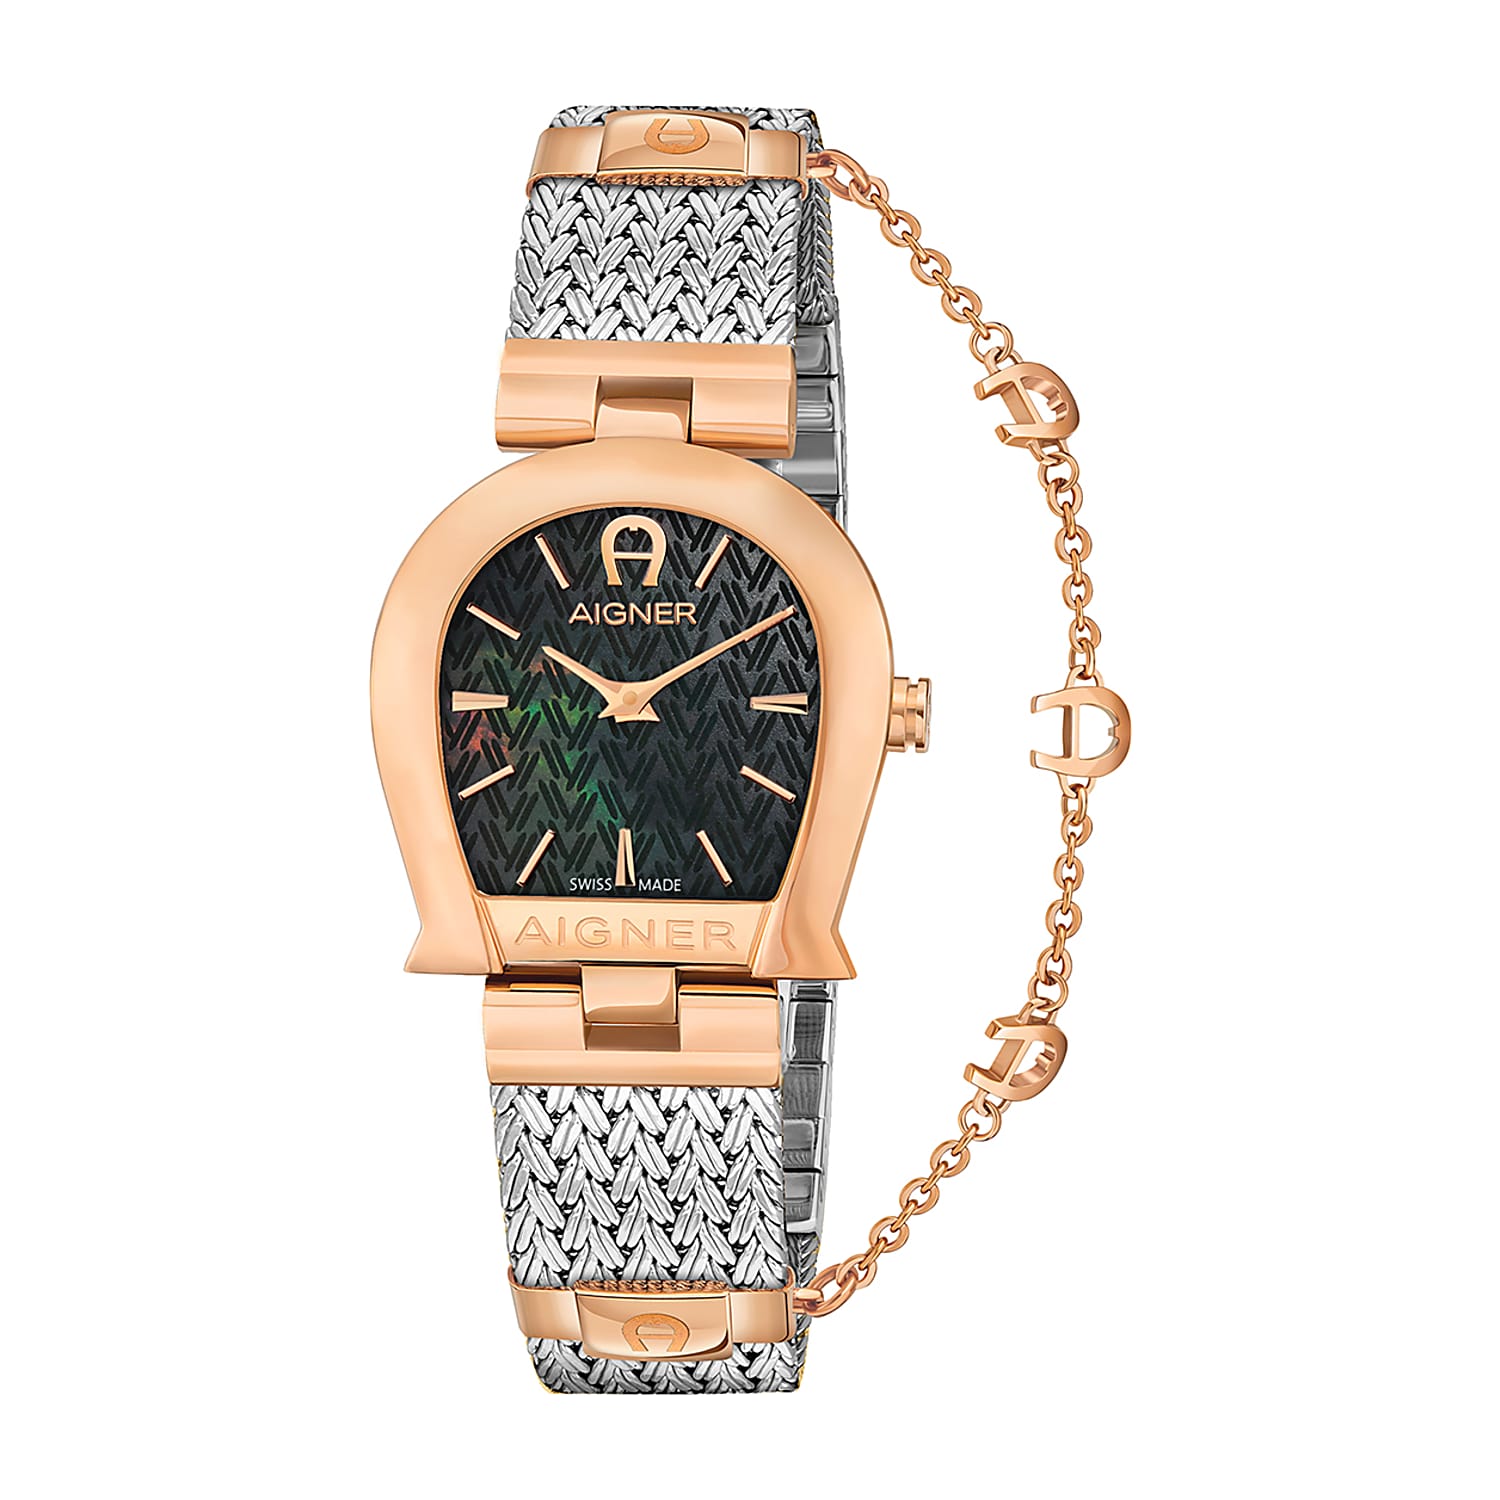 Ladies' watch Cremona Nuovo silver-rosegold